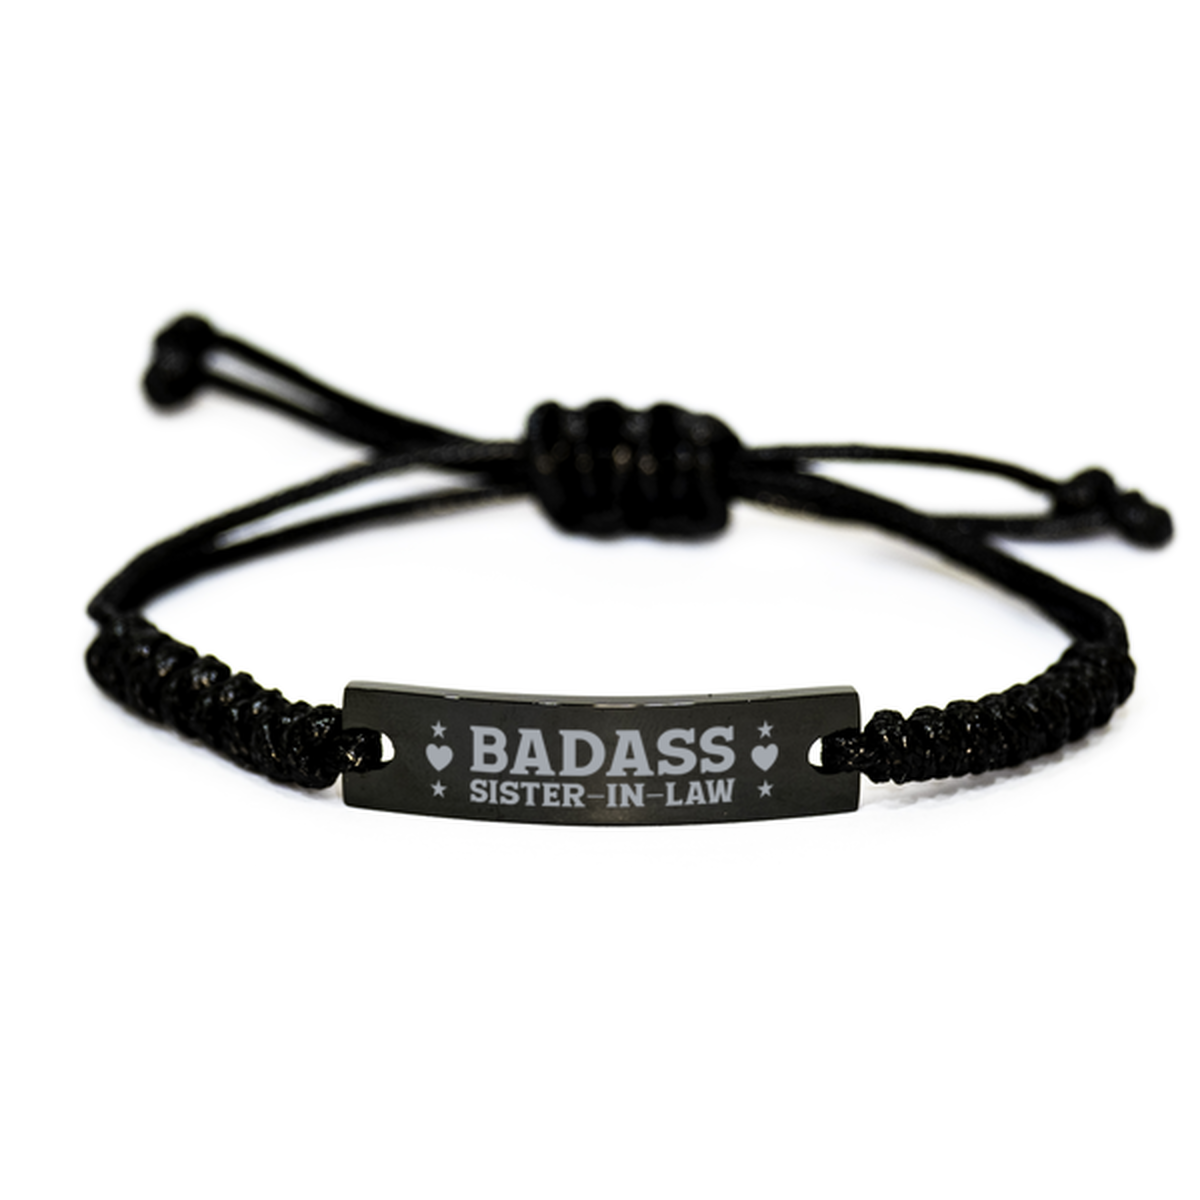 Sister-in-law Rope Bracelet, Badass Sister-in-law, Funny Family Gifts For Sister-in-law From Brother Sister